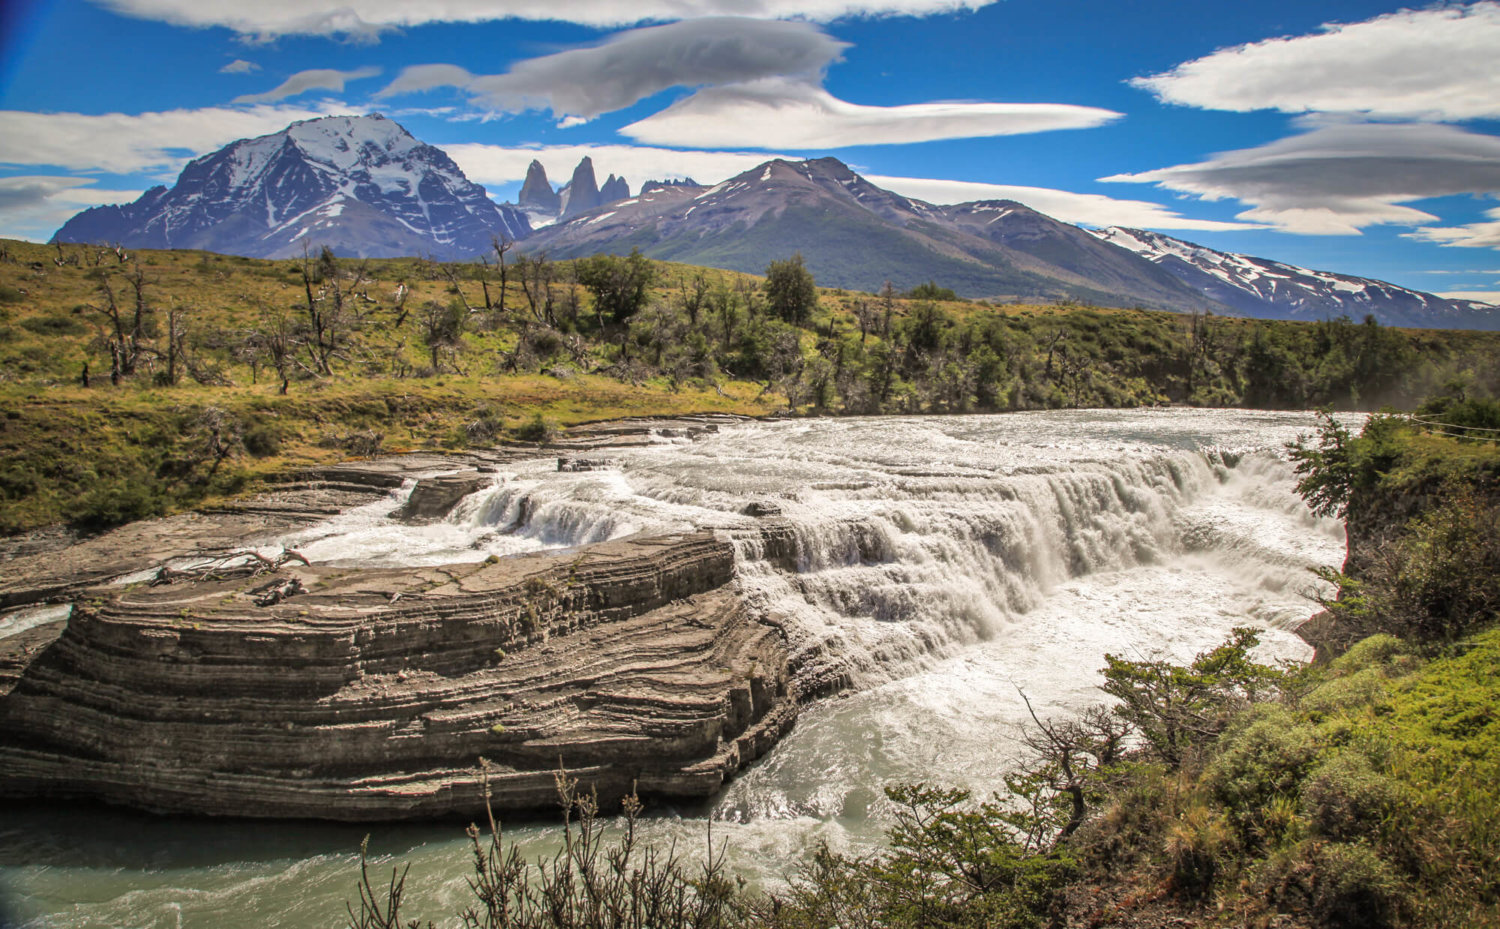 View of The Towers Torres del Paine